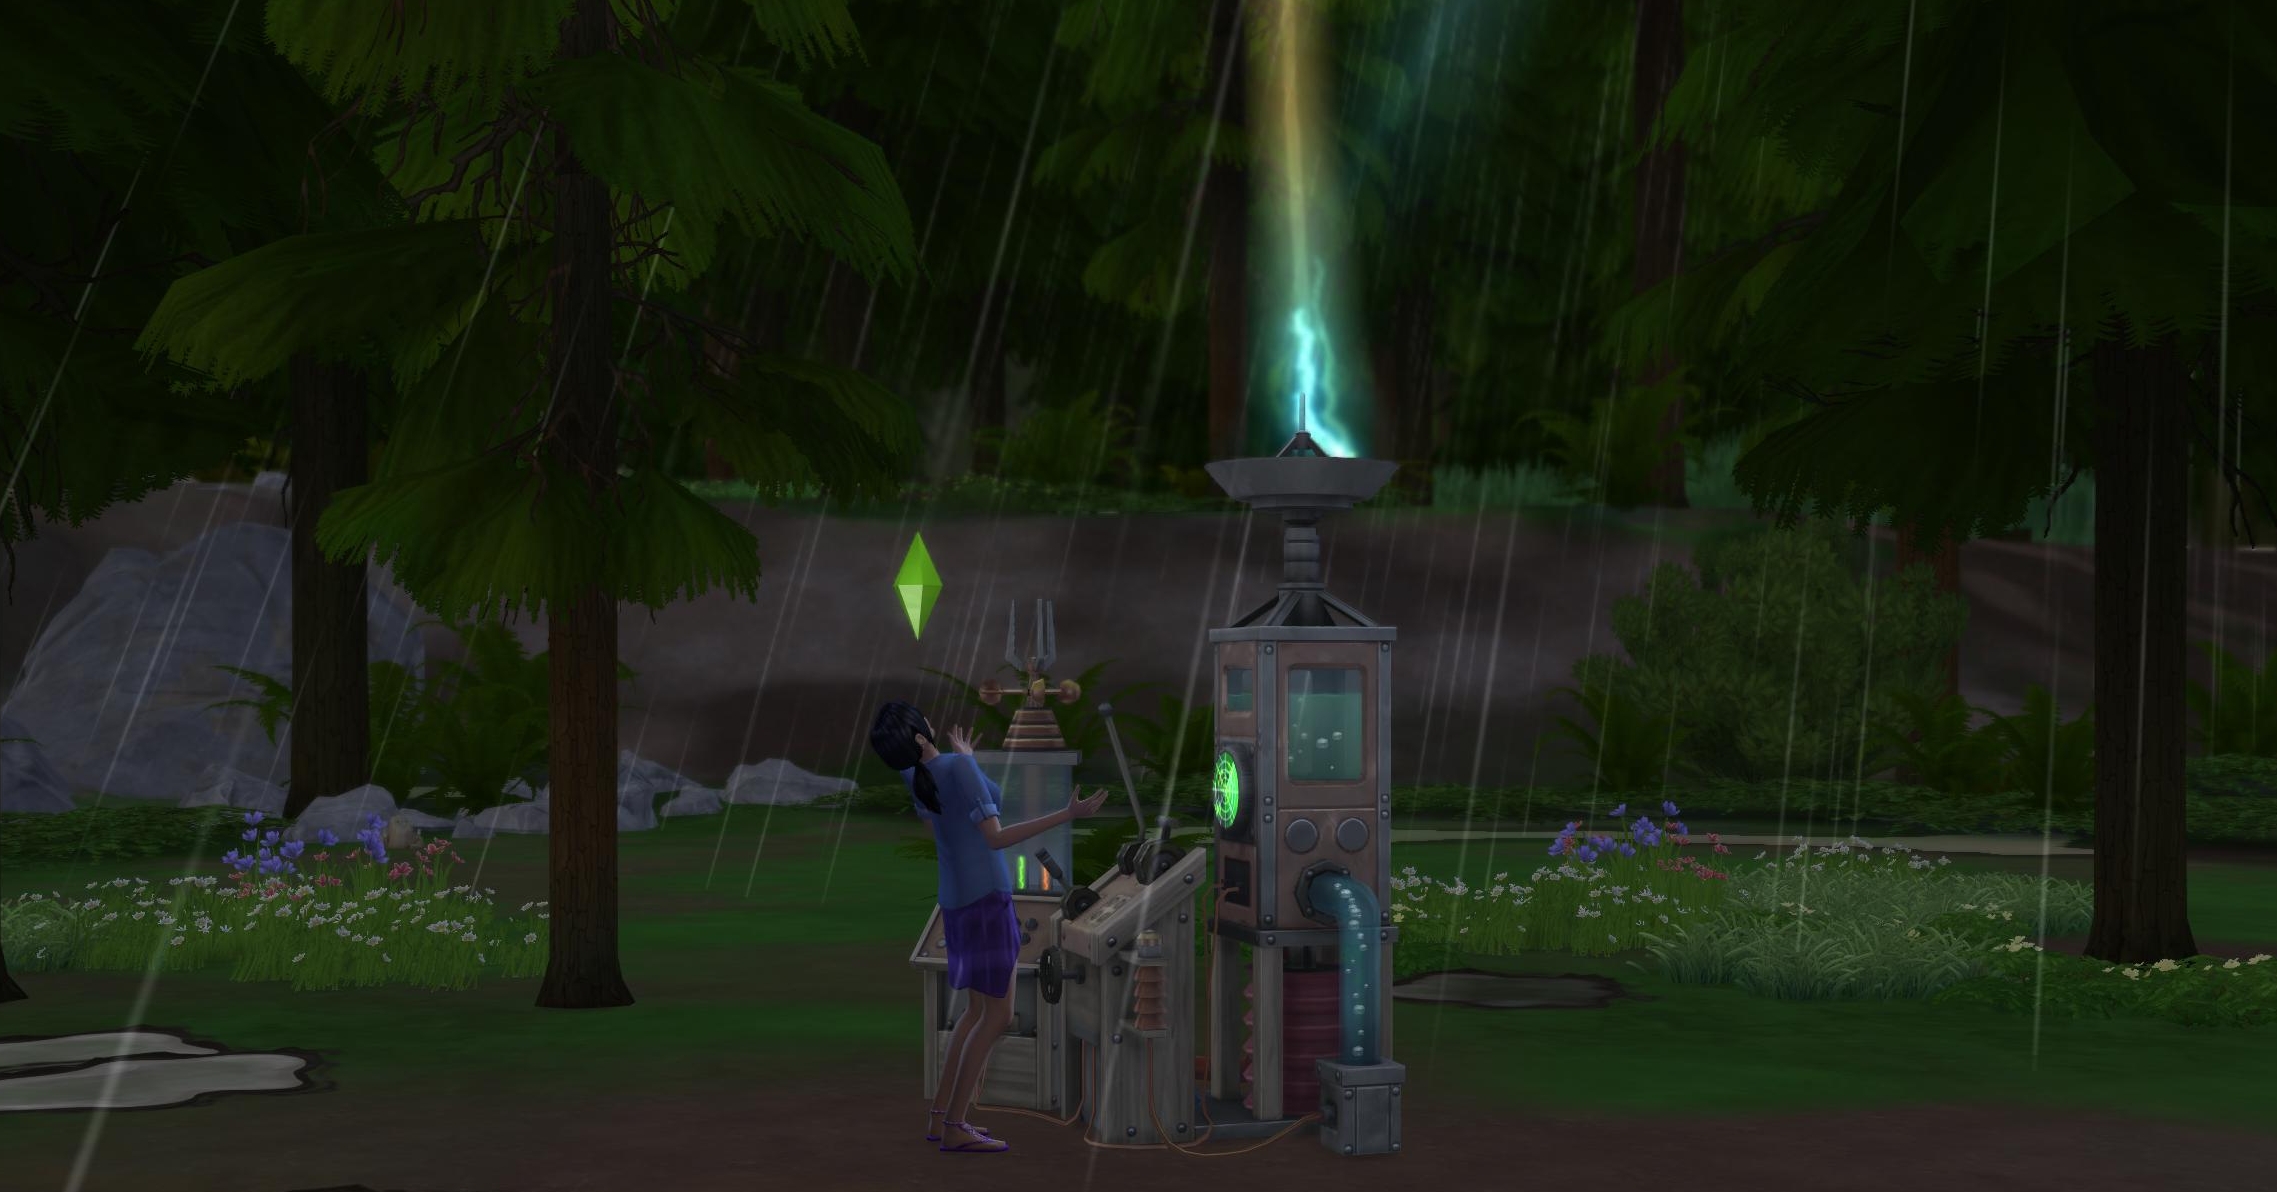 Dr. June's Weather controller machine in The Sims 4 Sesasons Expansion Pack